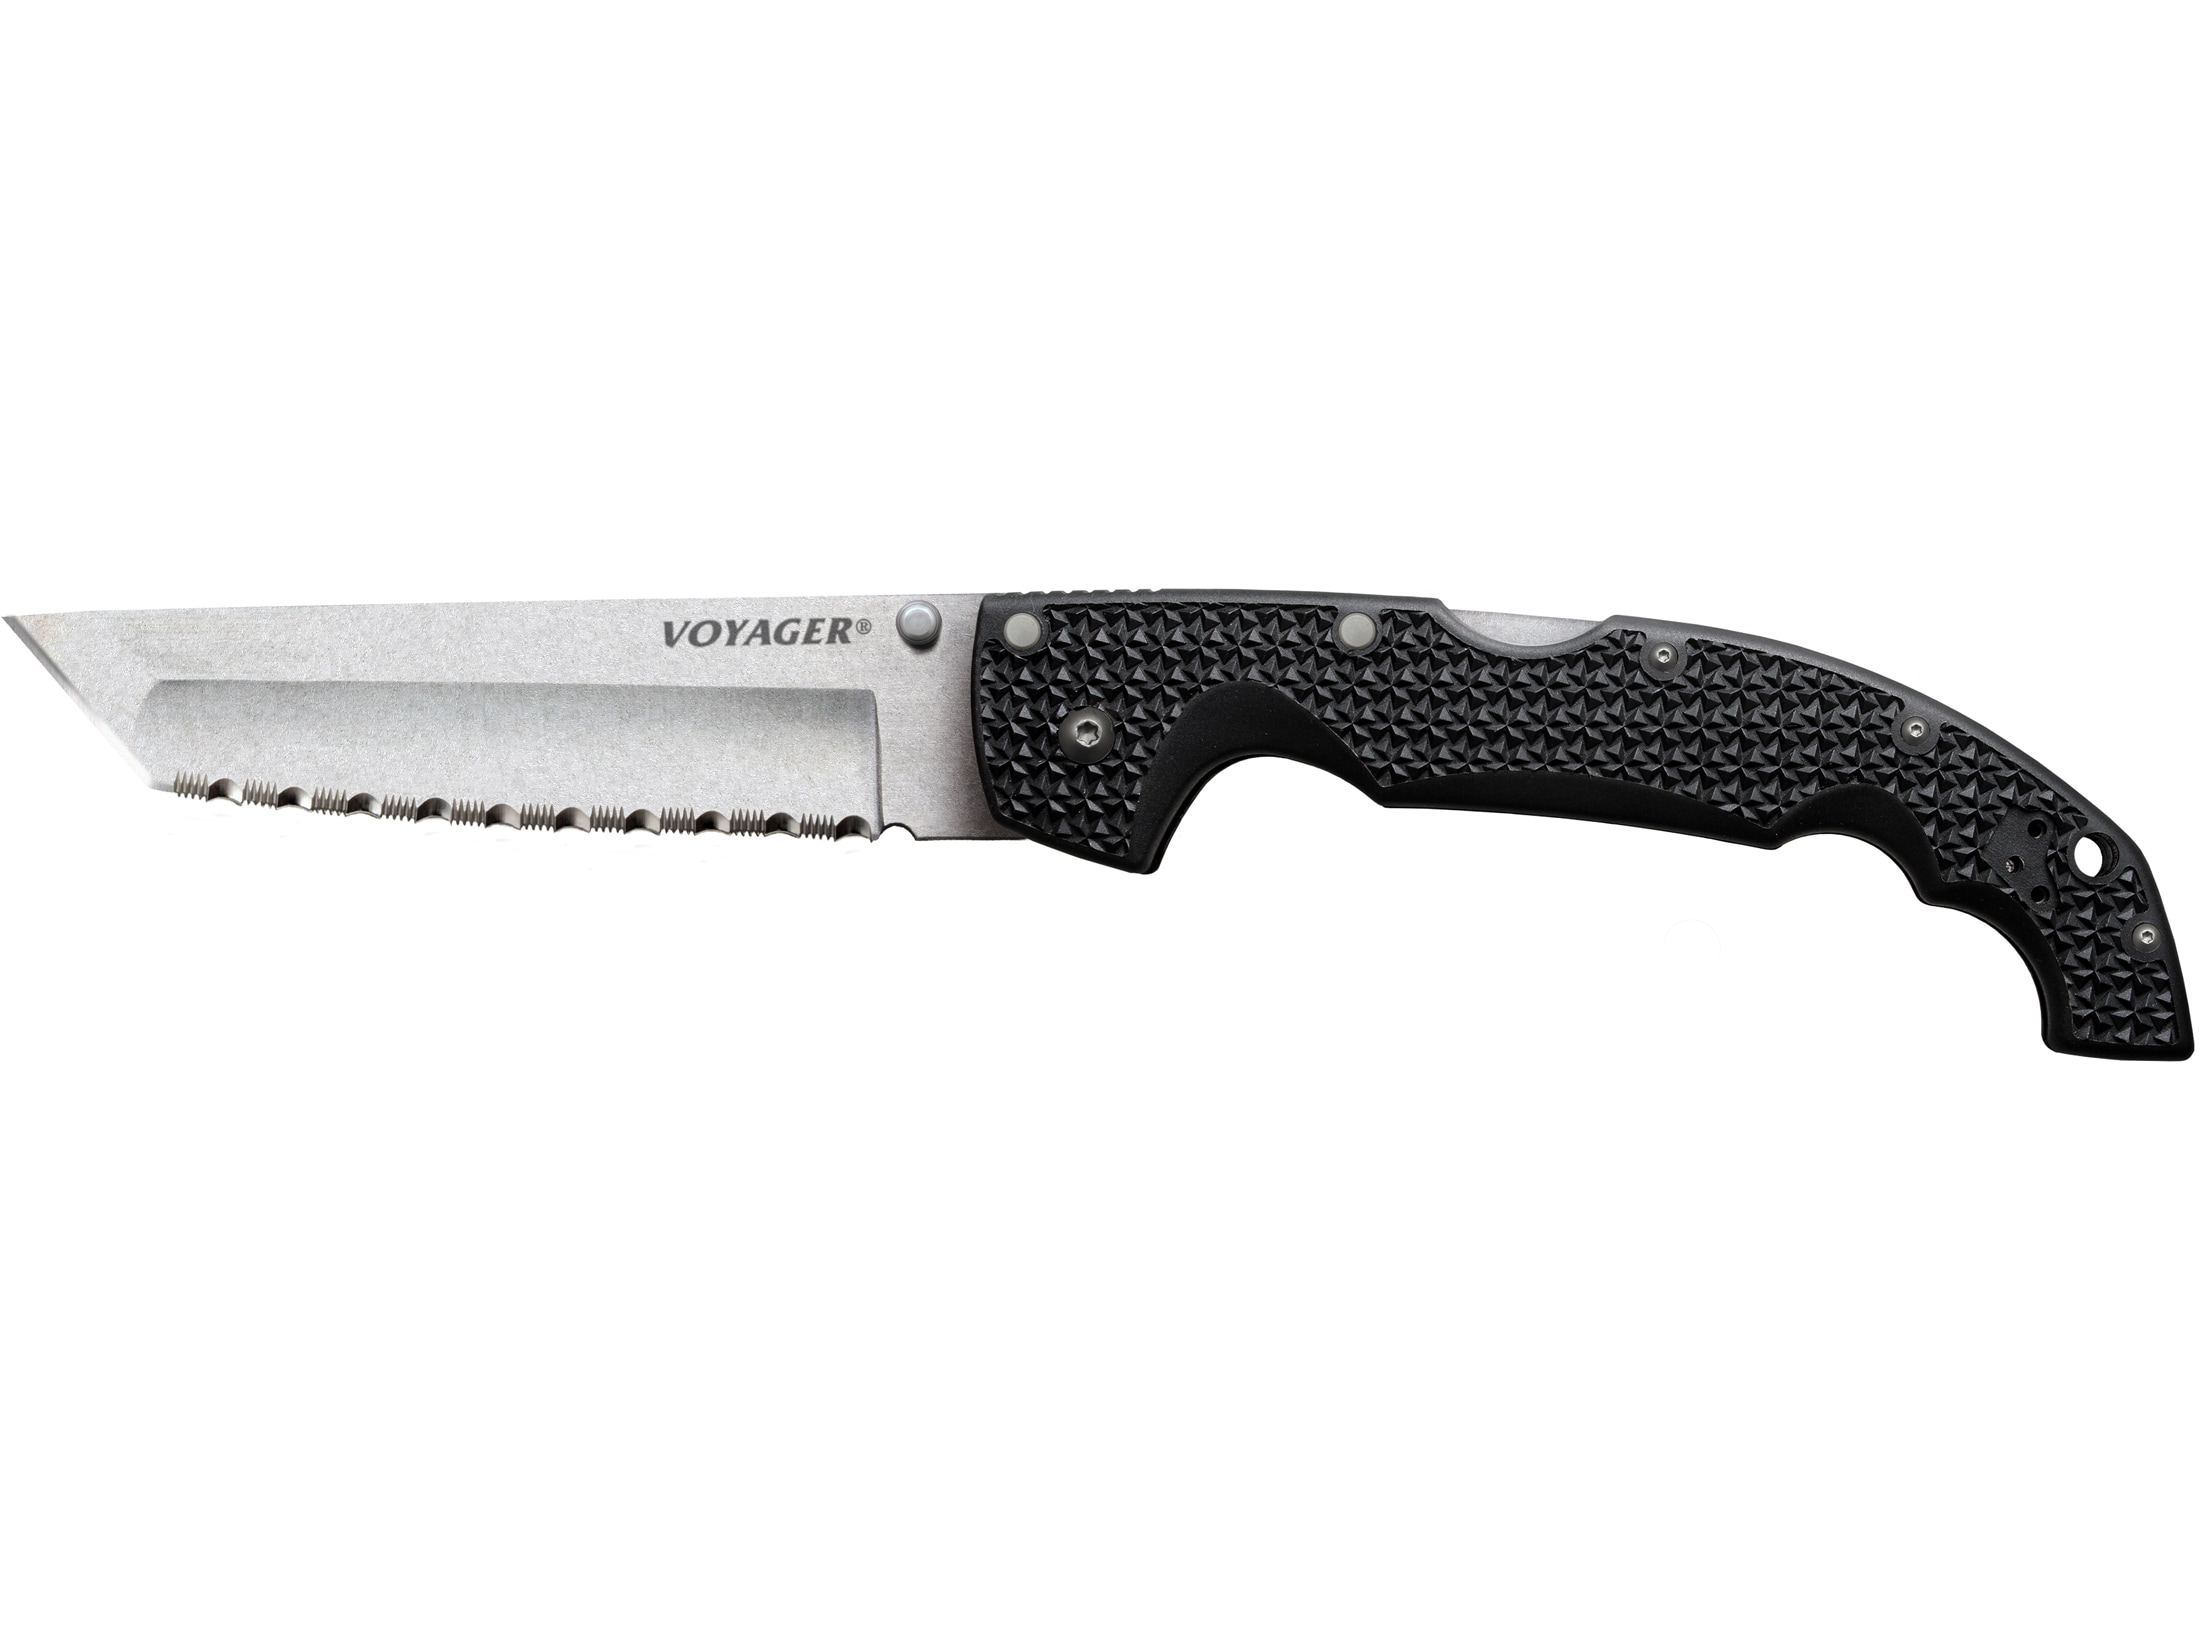 VOYAGER XL TANTO POINT - SERRATED